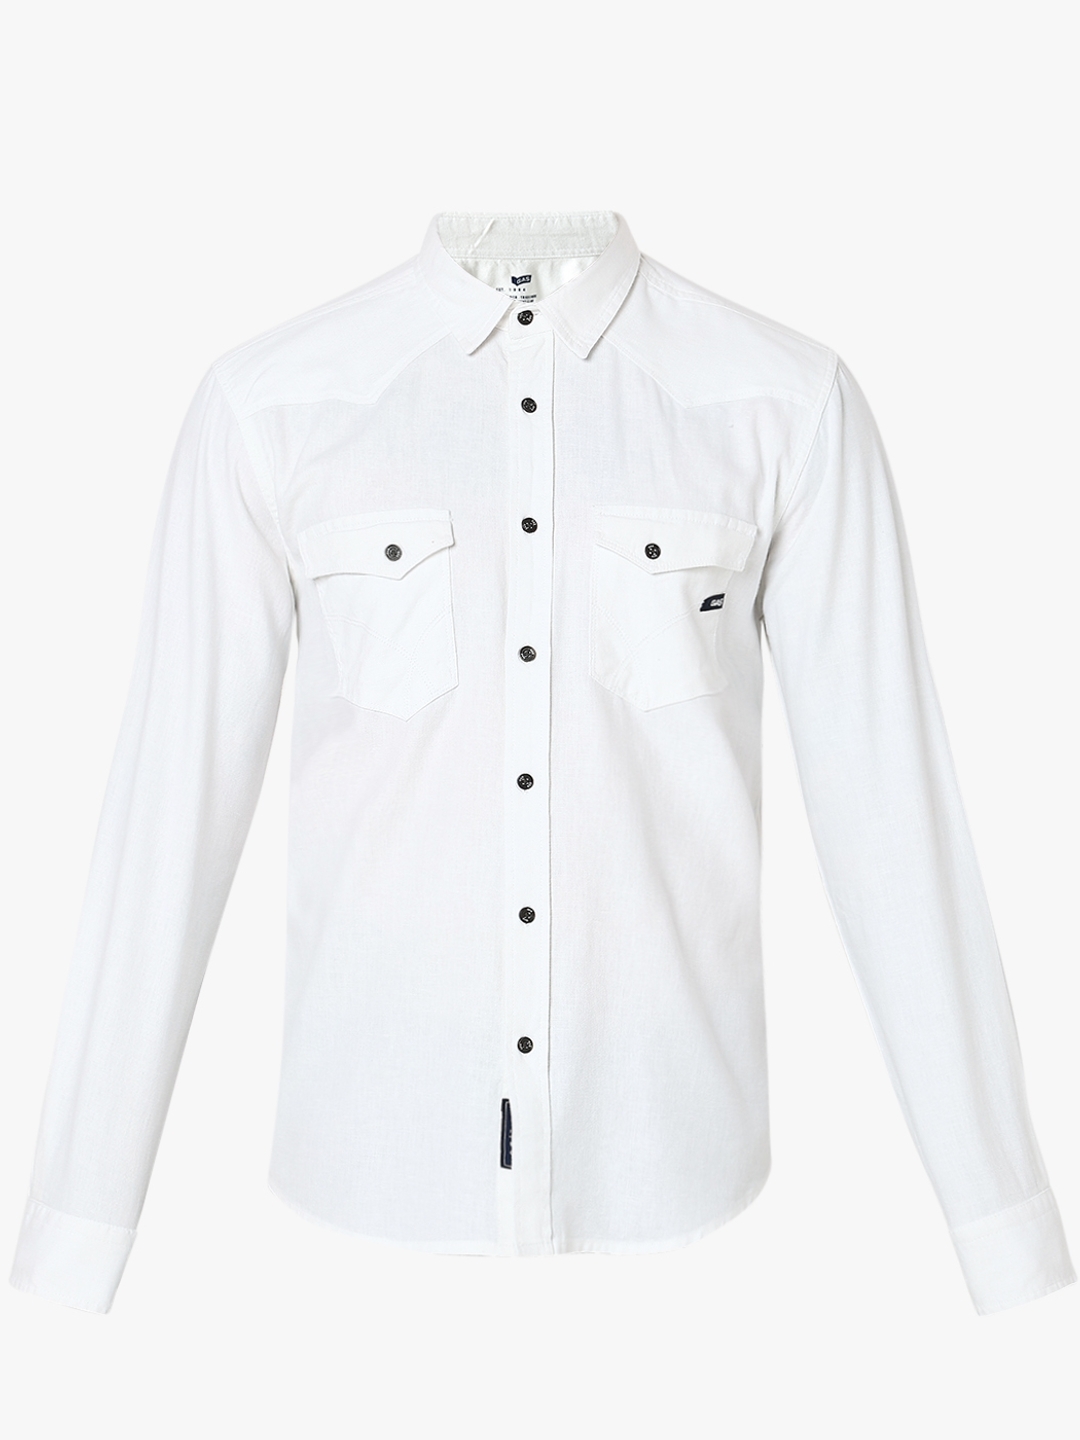 Relaxed Fit Full Sleeve Solid Cotton Linen Shirts